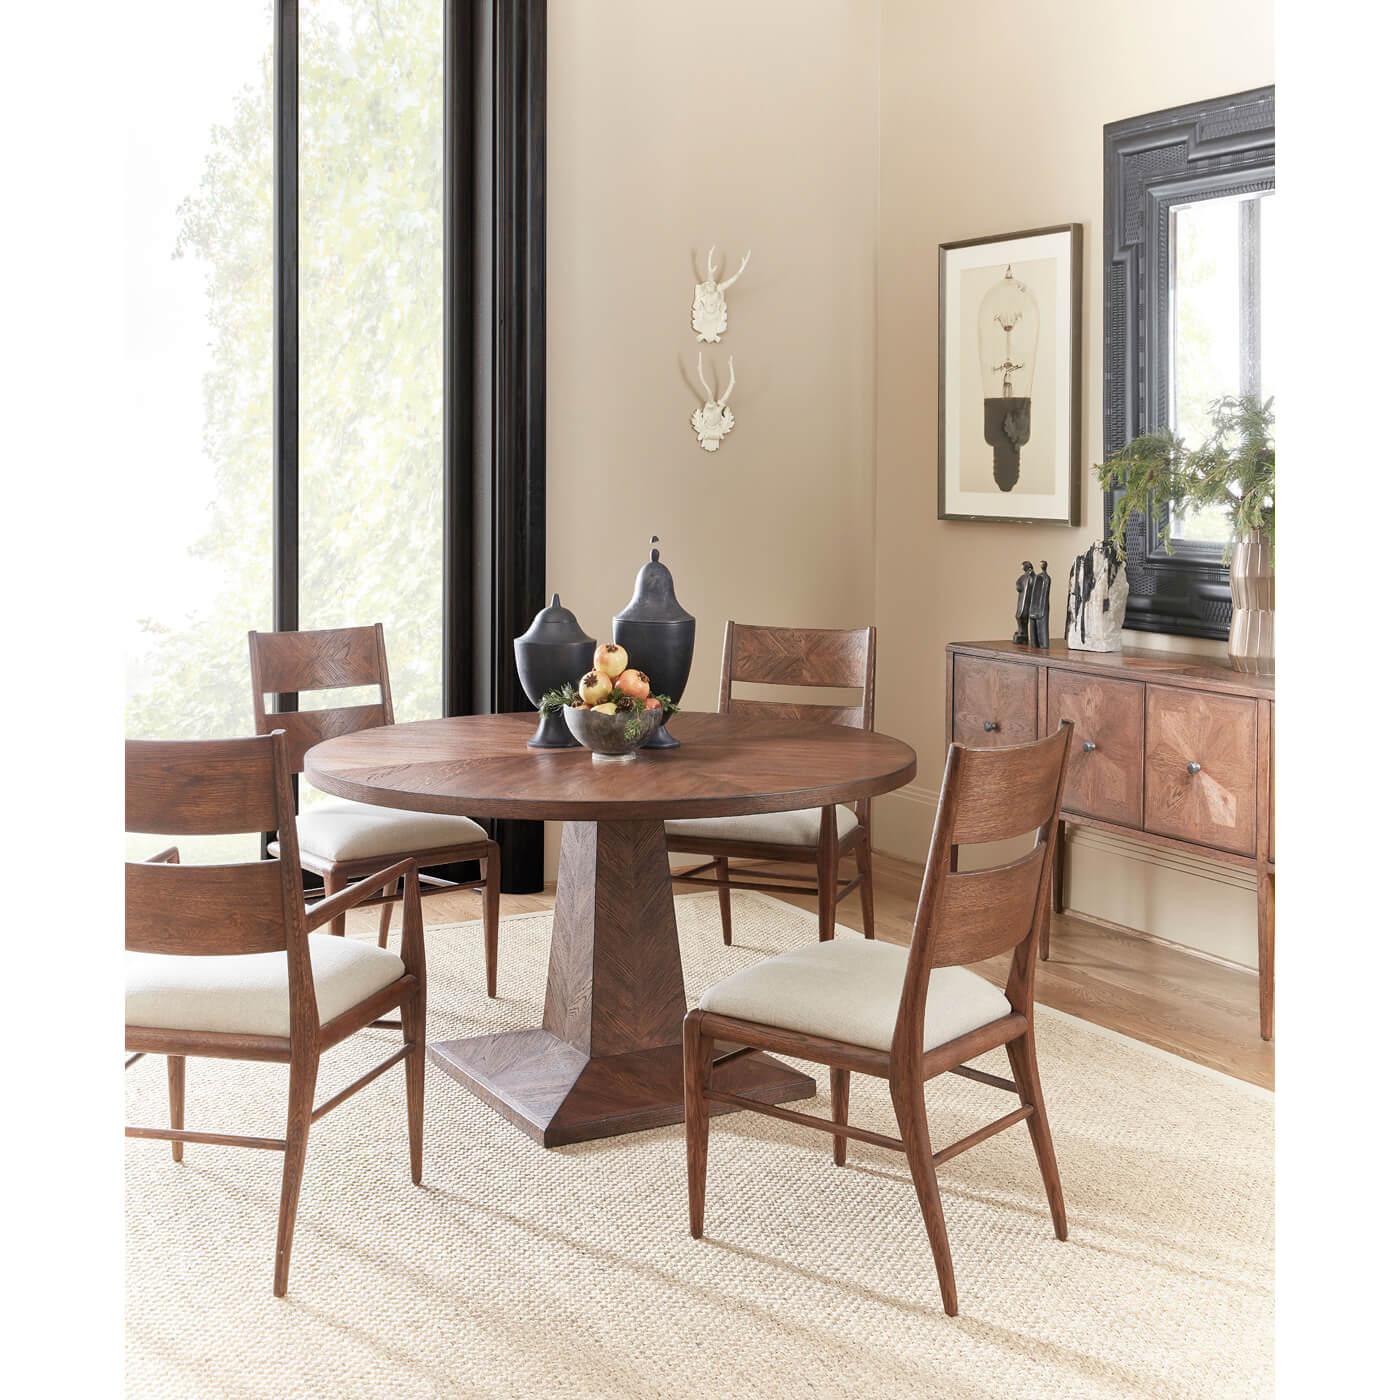 Contemporary Oak Parquetry Dining Chair, Light Oak For Sale